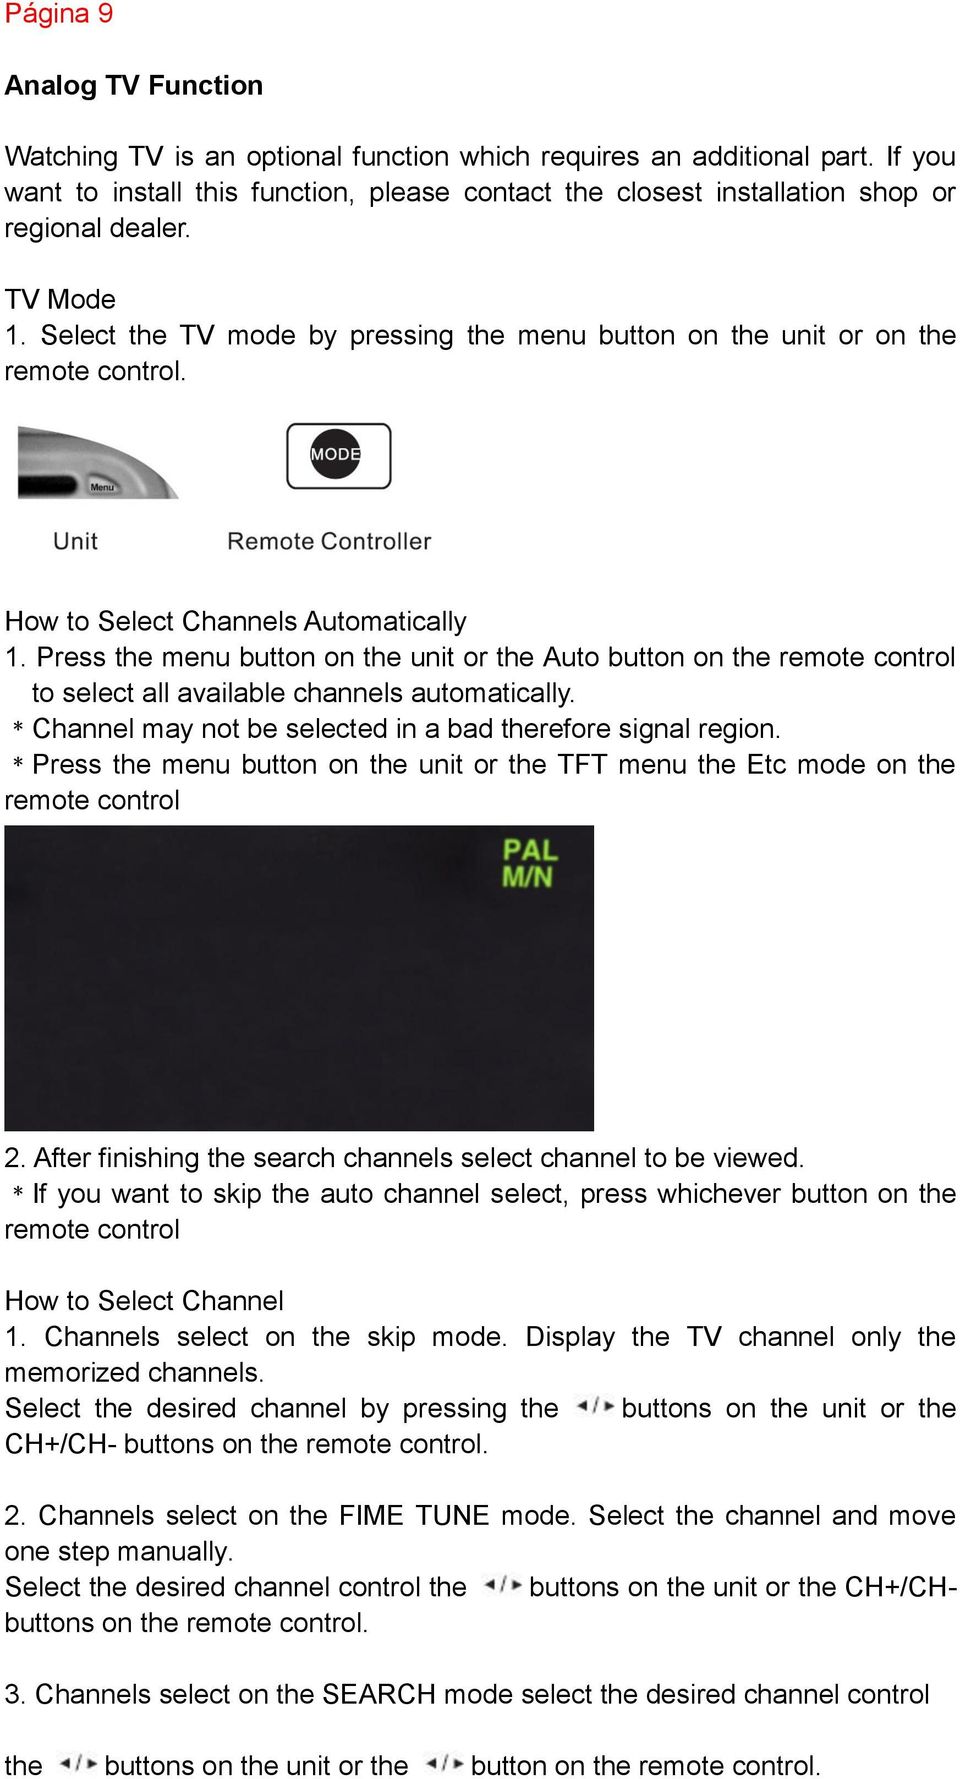 How to Select Channels Automatically 1. Press the menu button on the unit or the Auto button on the remote control to select all available channels automatically.